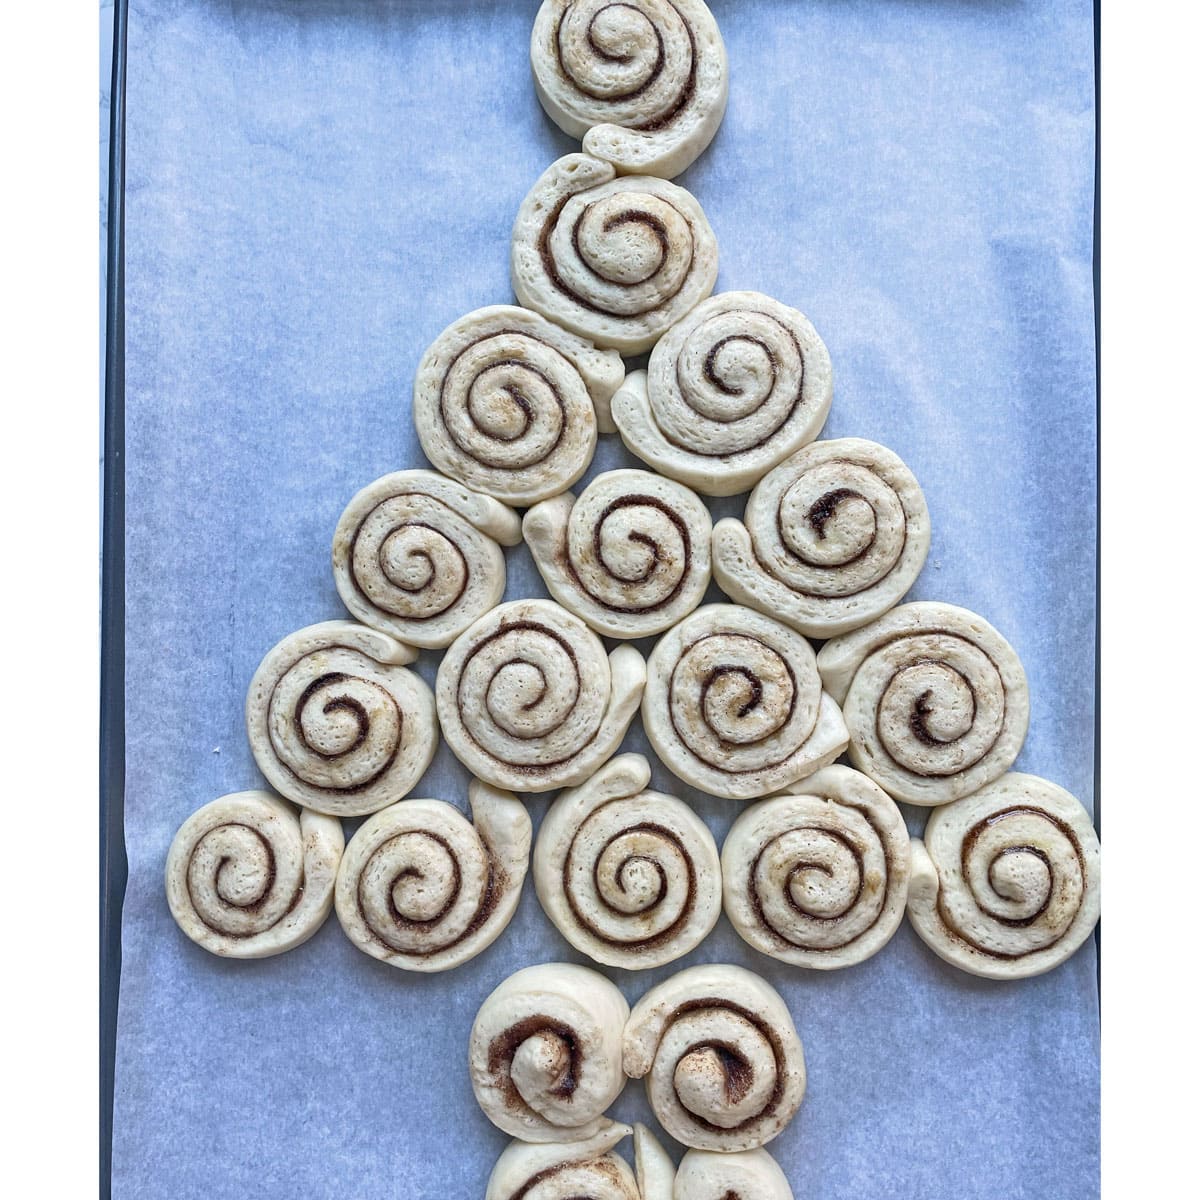 Cinnamon Rolls arranged as Christmas tree and ready to bake.